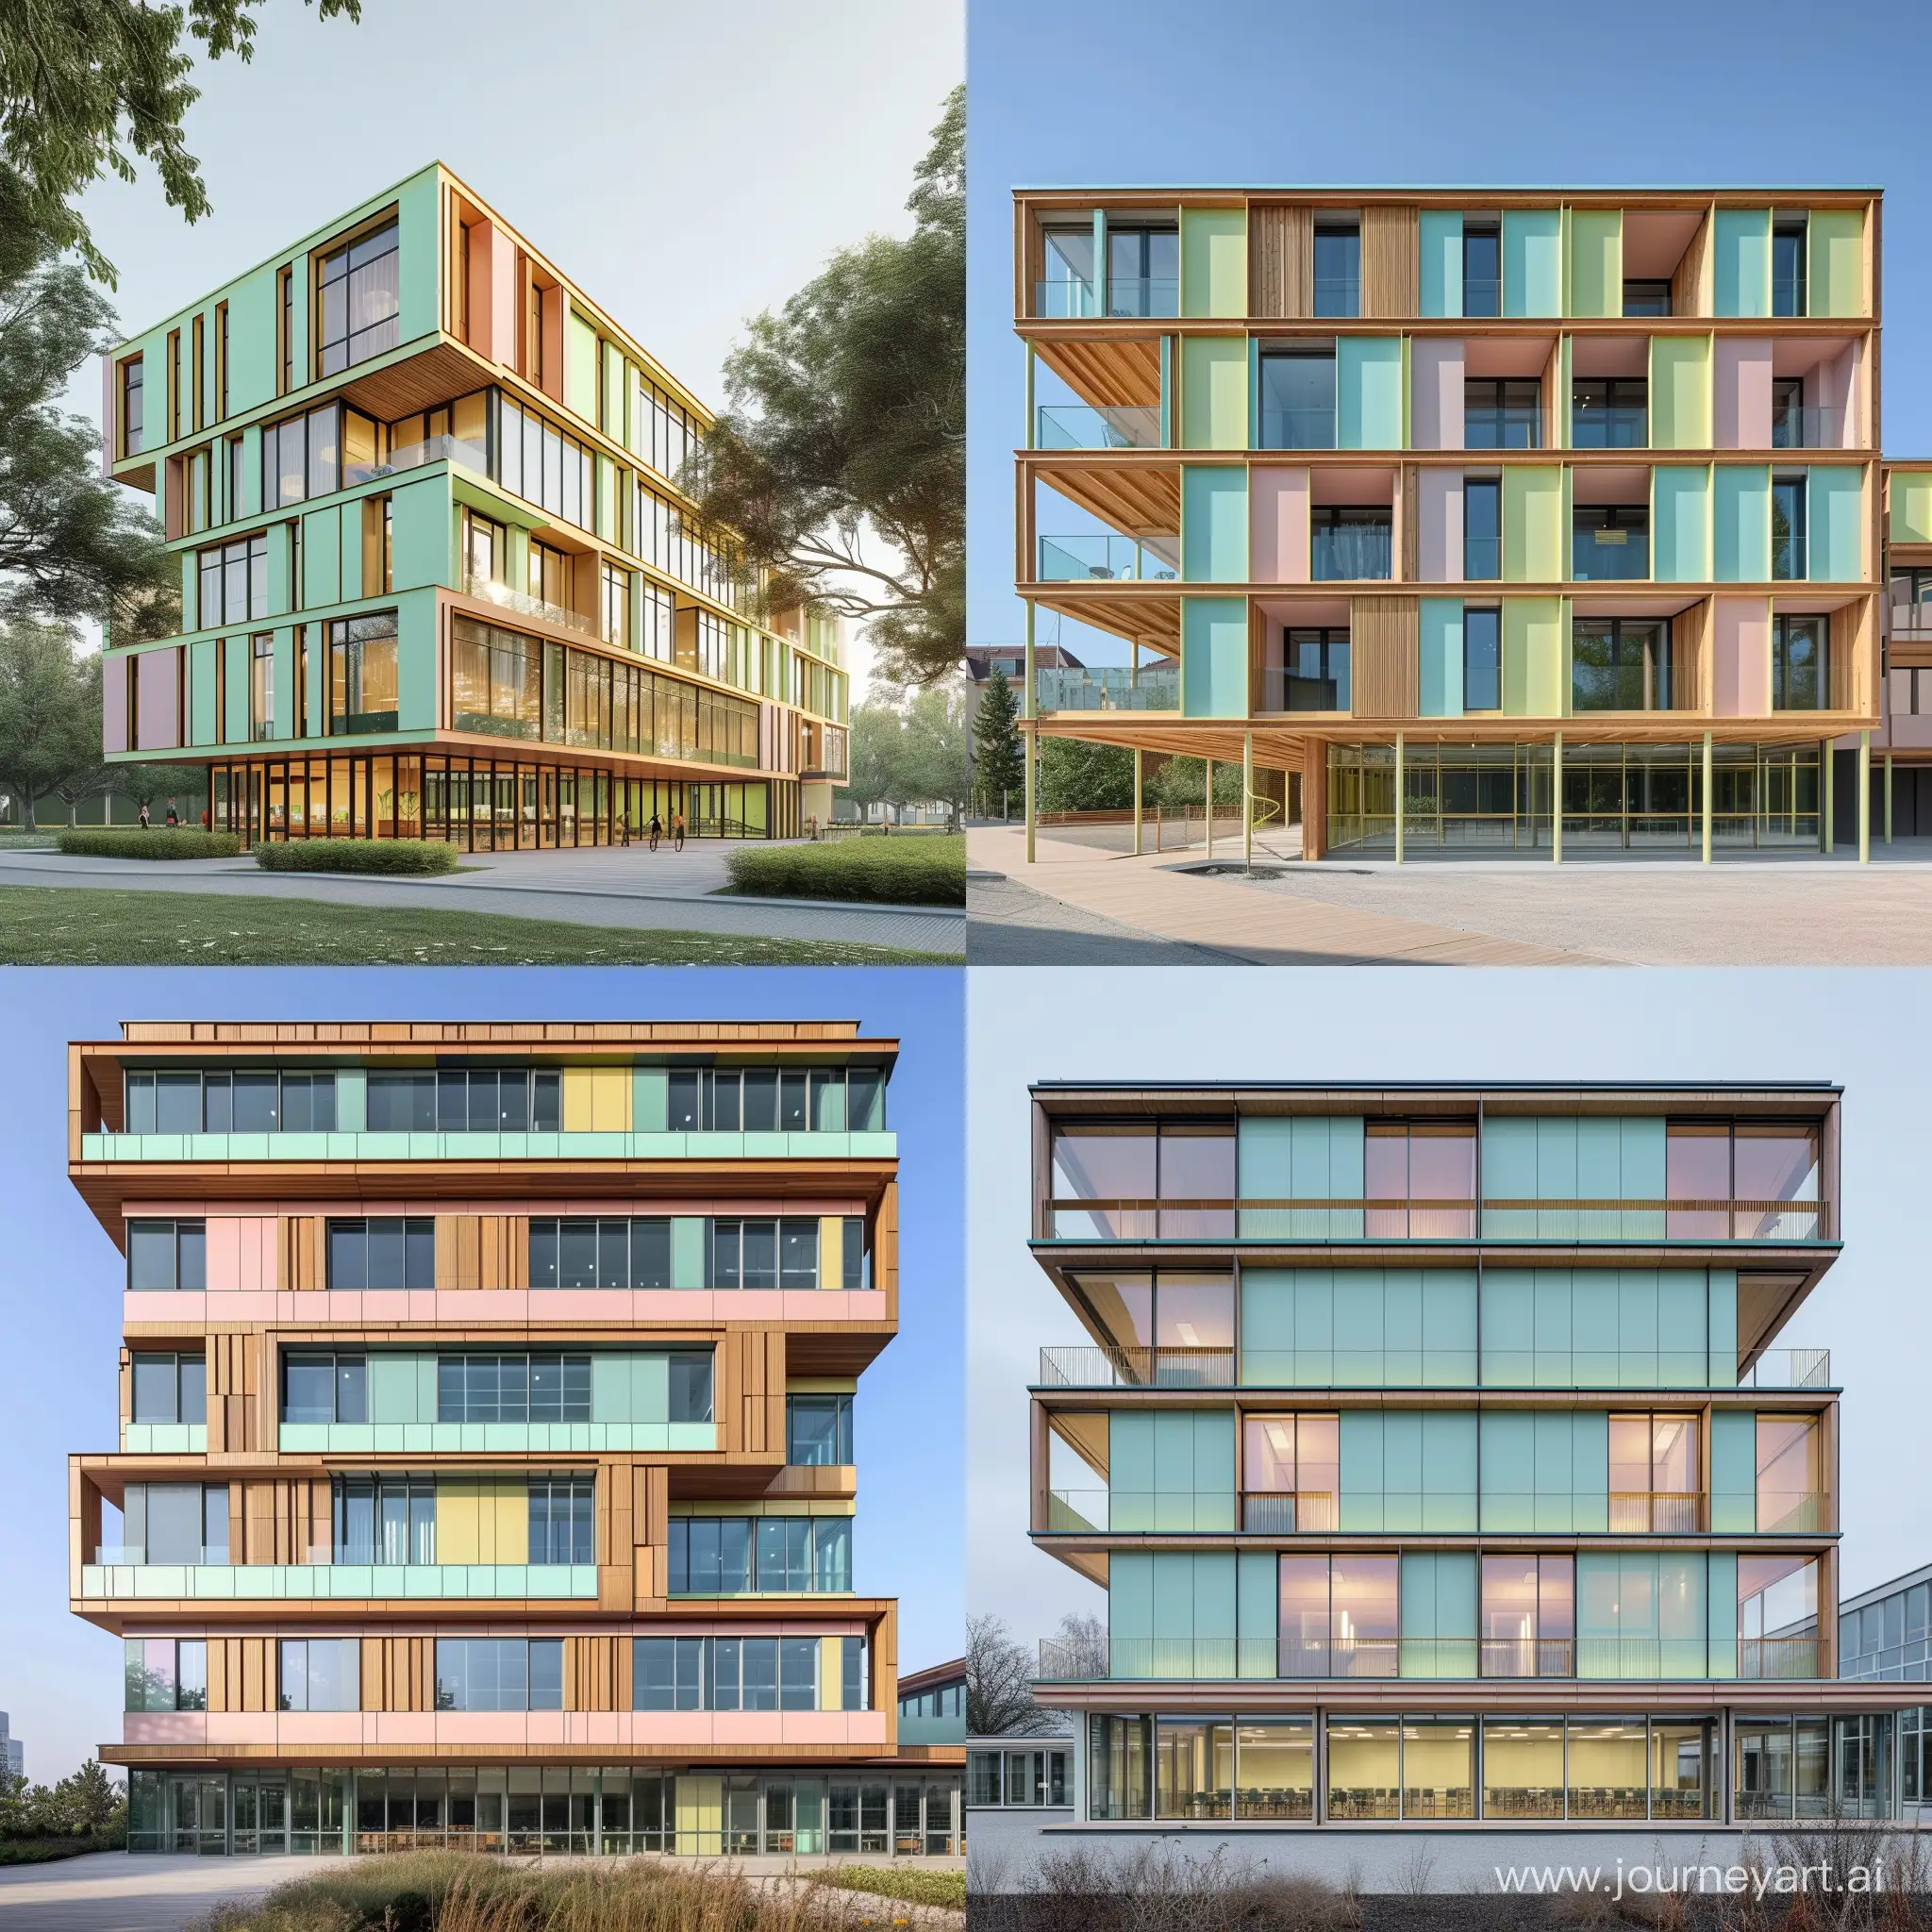 A university building consisting of 6 floors, a modern pastel building made of wood and glass, and follows the green architecture